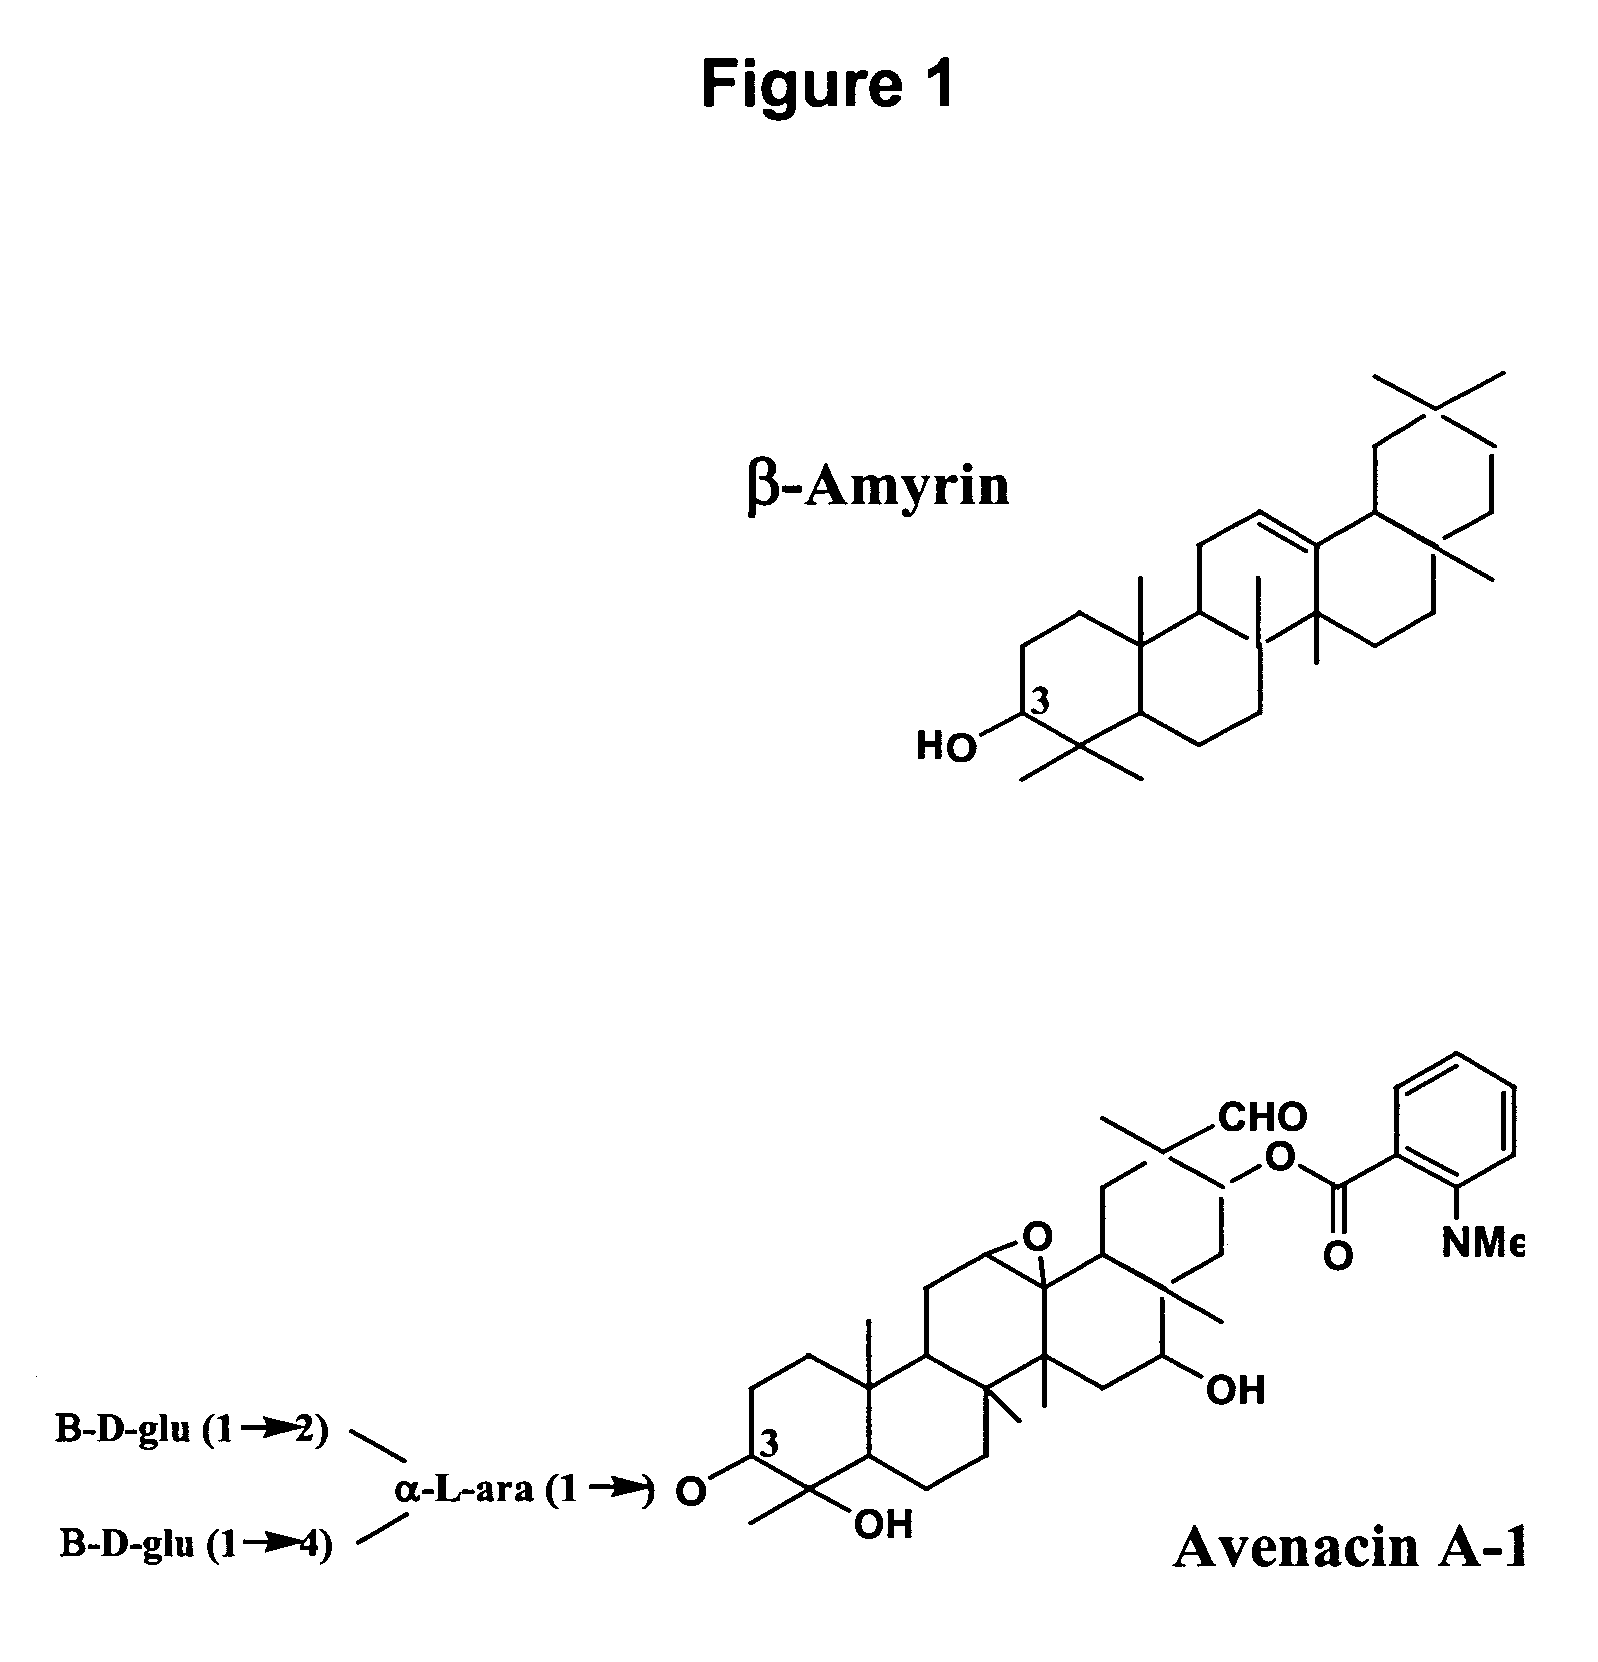 Enzymes involved in triterpene synthesis